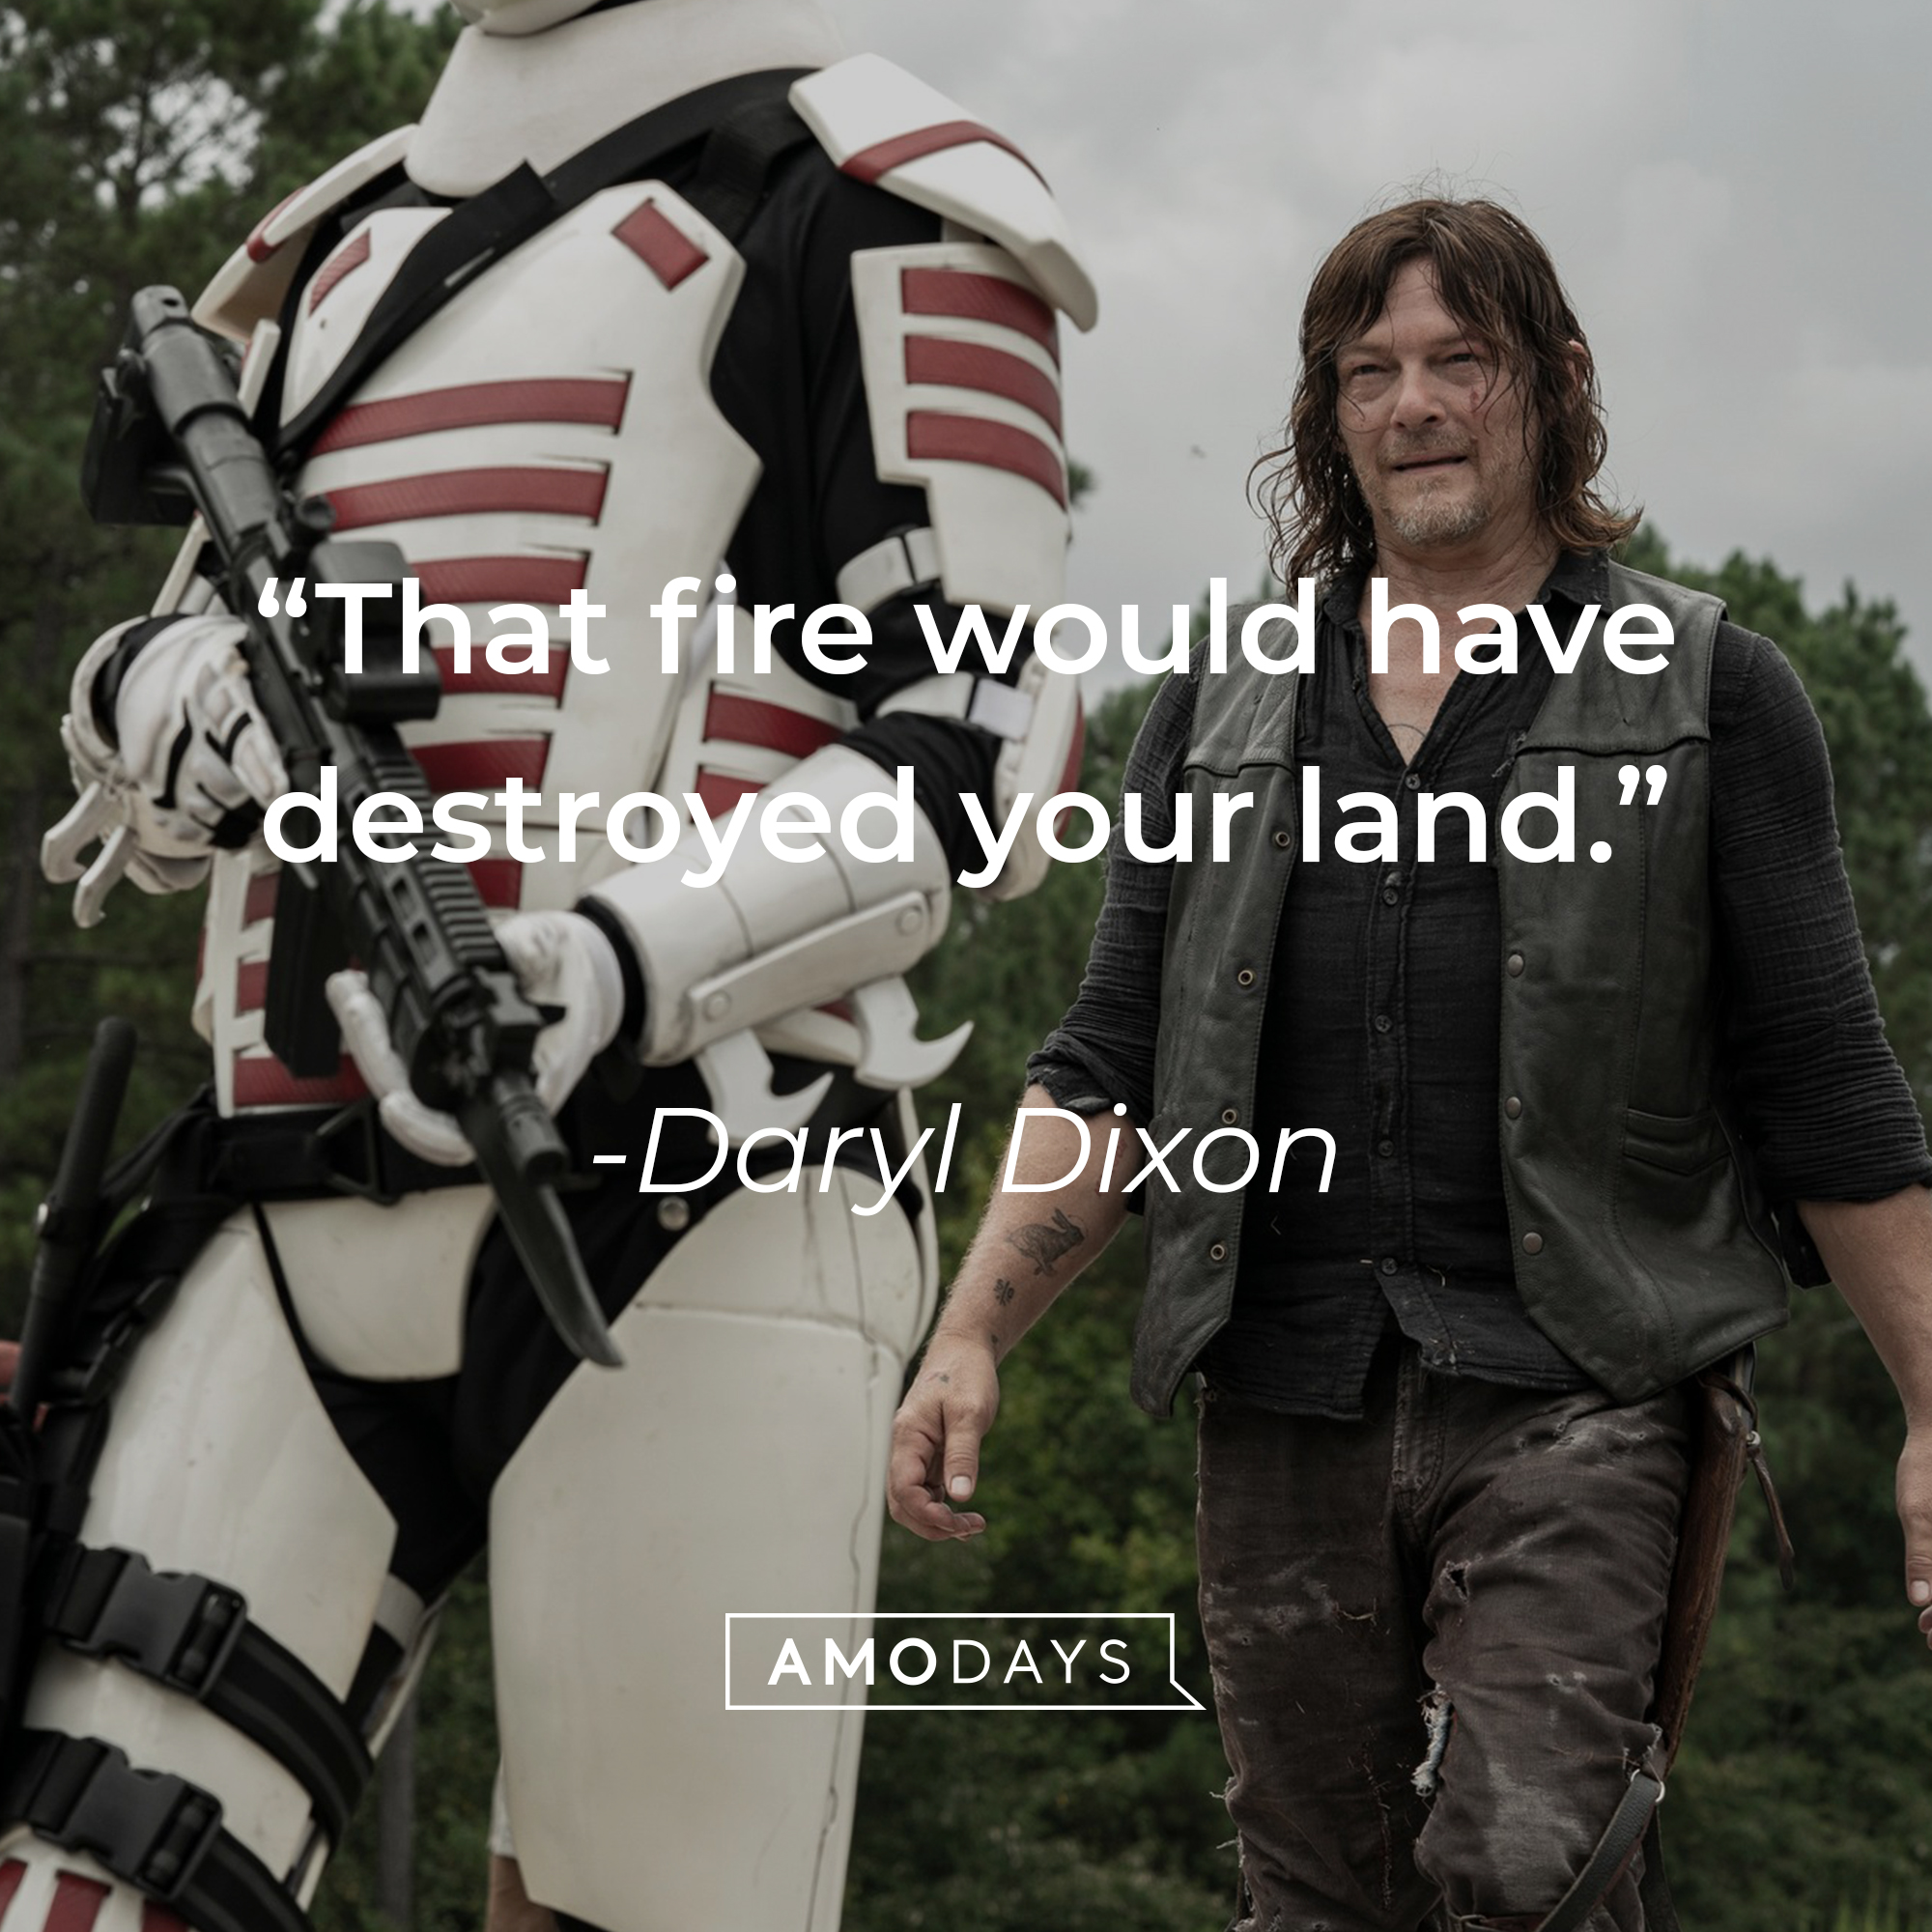 An image of Daryl Dixon with his quote: “That fire would have destroyed your land.” | Source: facebook.com/TheWalkingDeadAMC